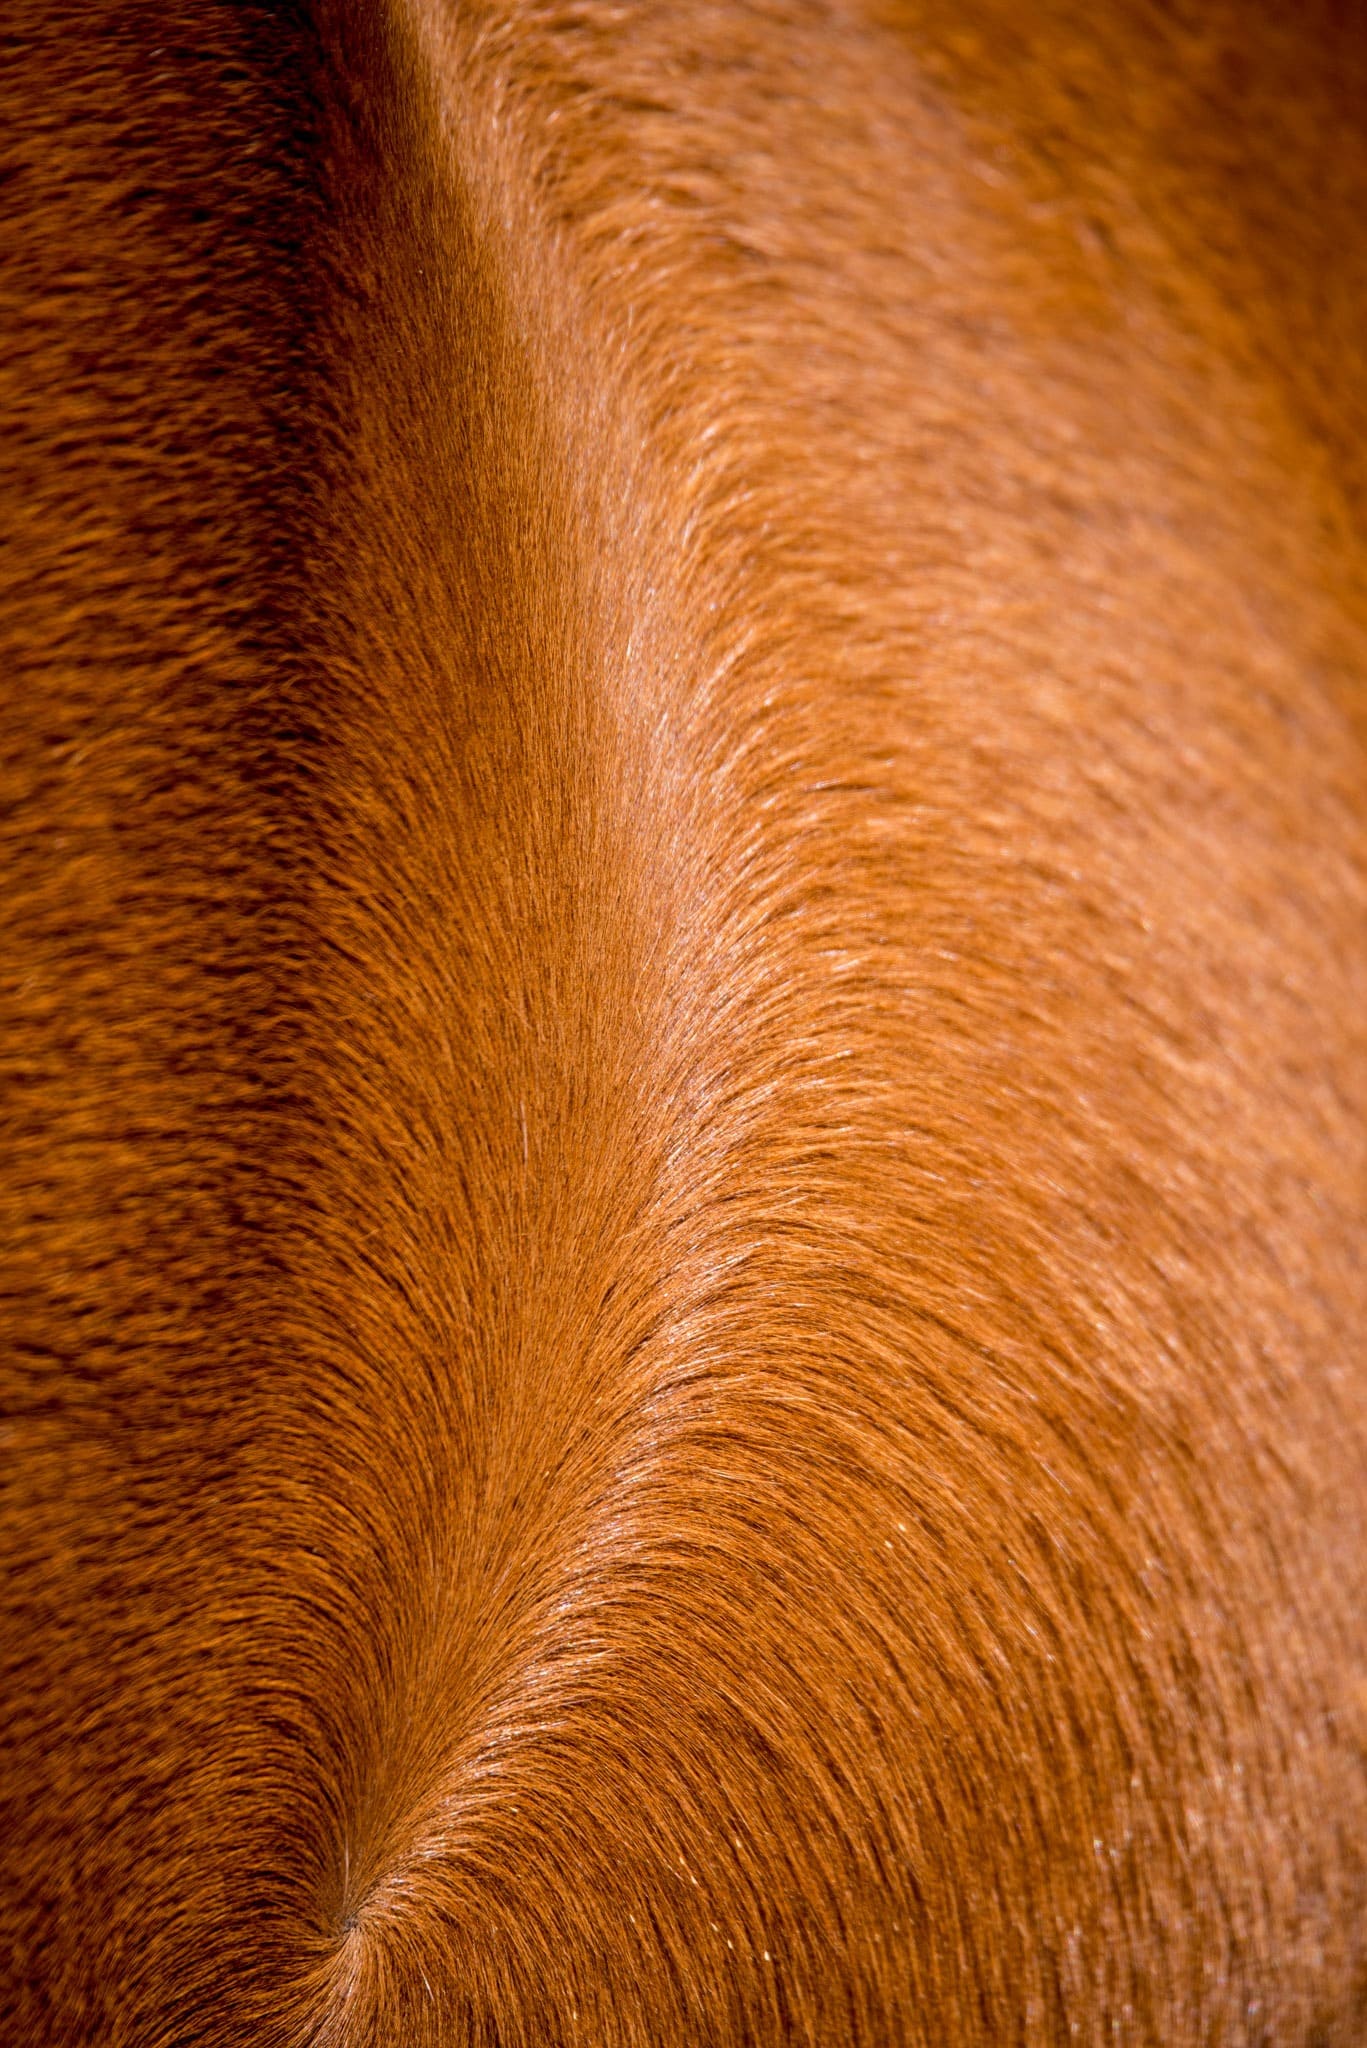 This is a close-up of the pattern made by the hair growing on the neck of a wild horse on San Pedro Mesa in the San Luis Valley of Colorado.